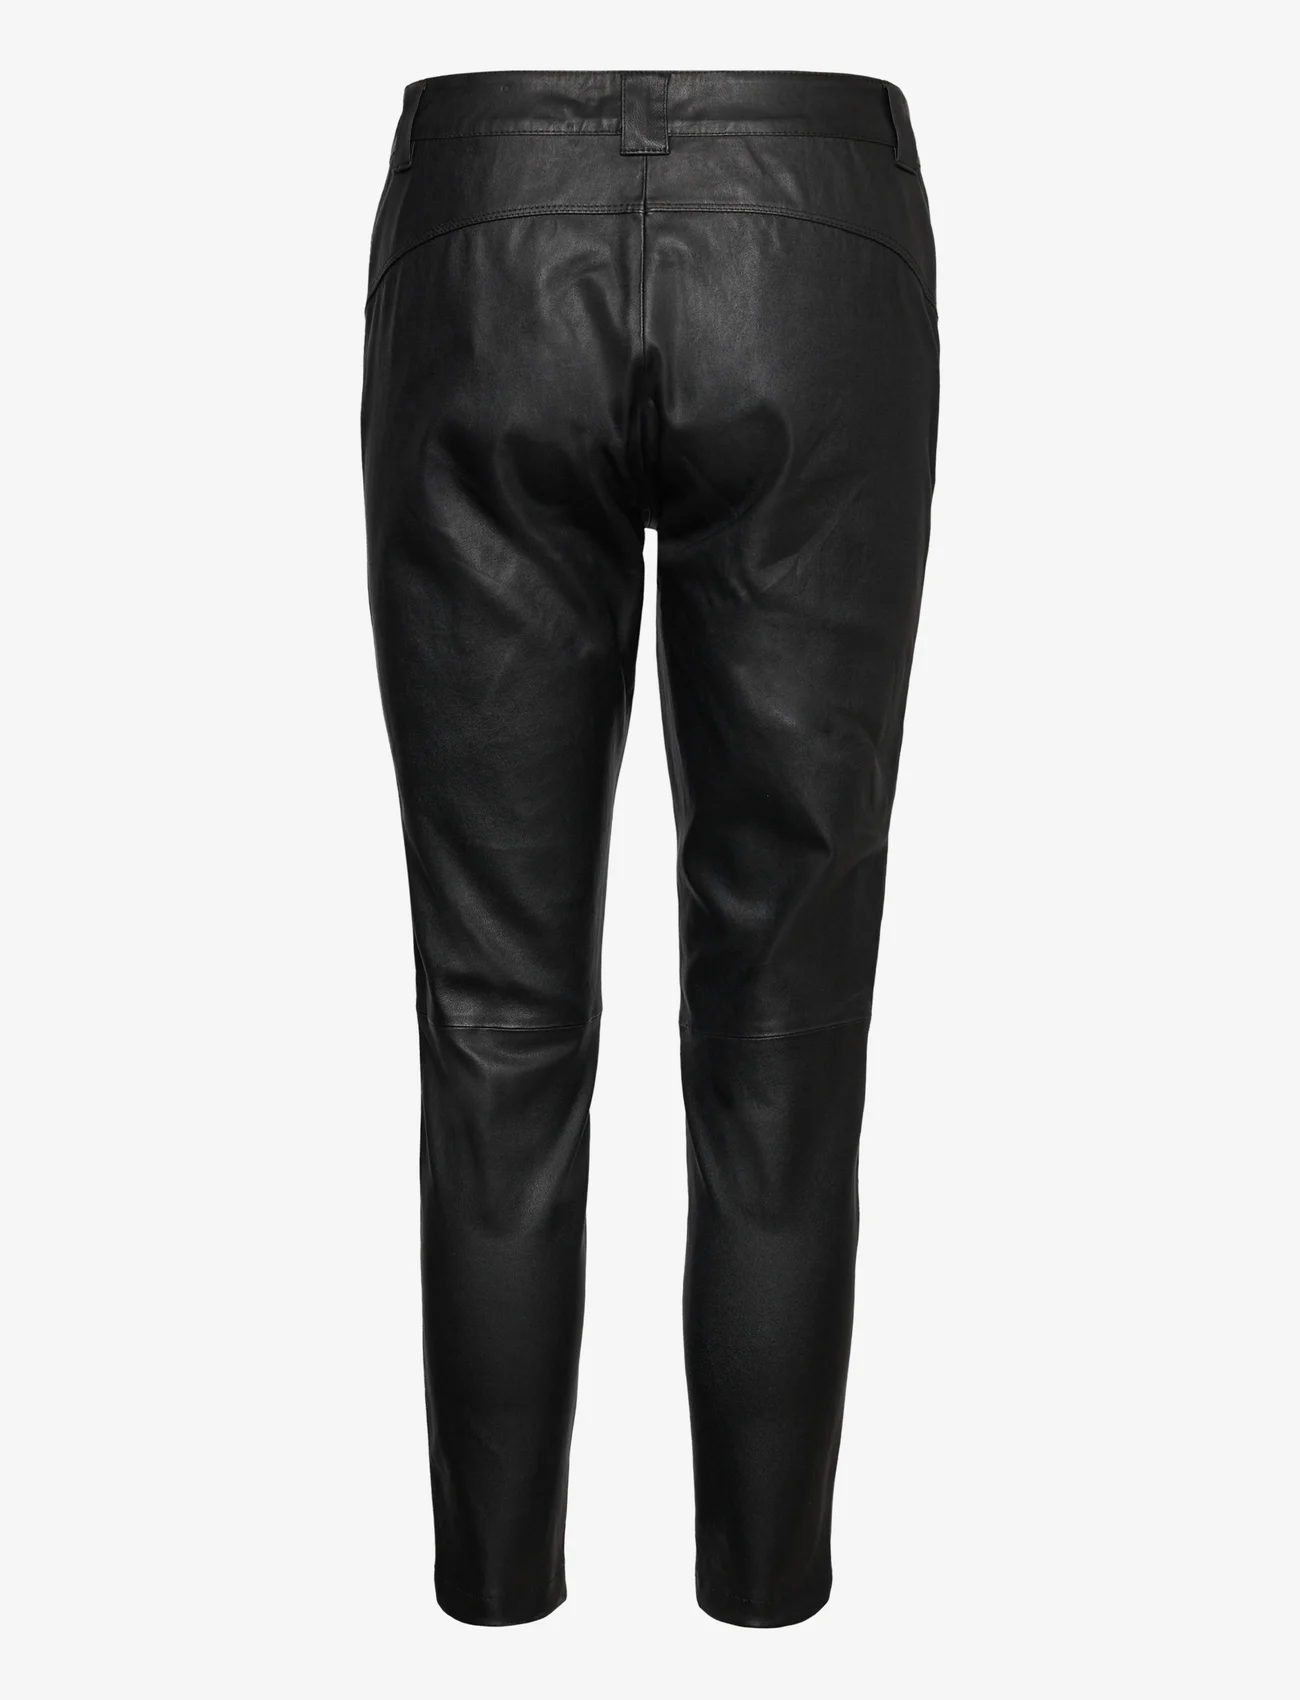 DEPECHE - Chino pant 7/8 pant - party wear at outlet prices - black - 1